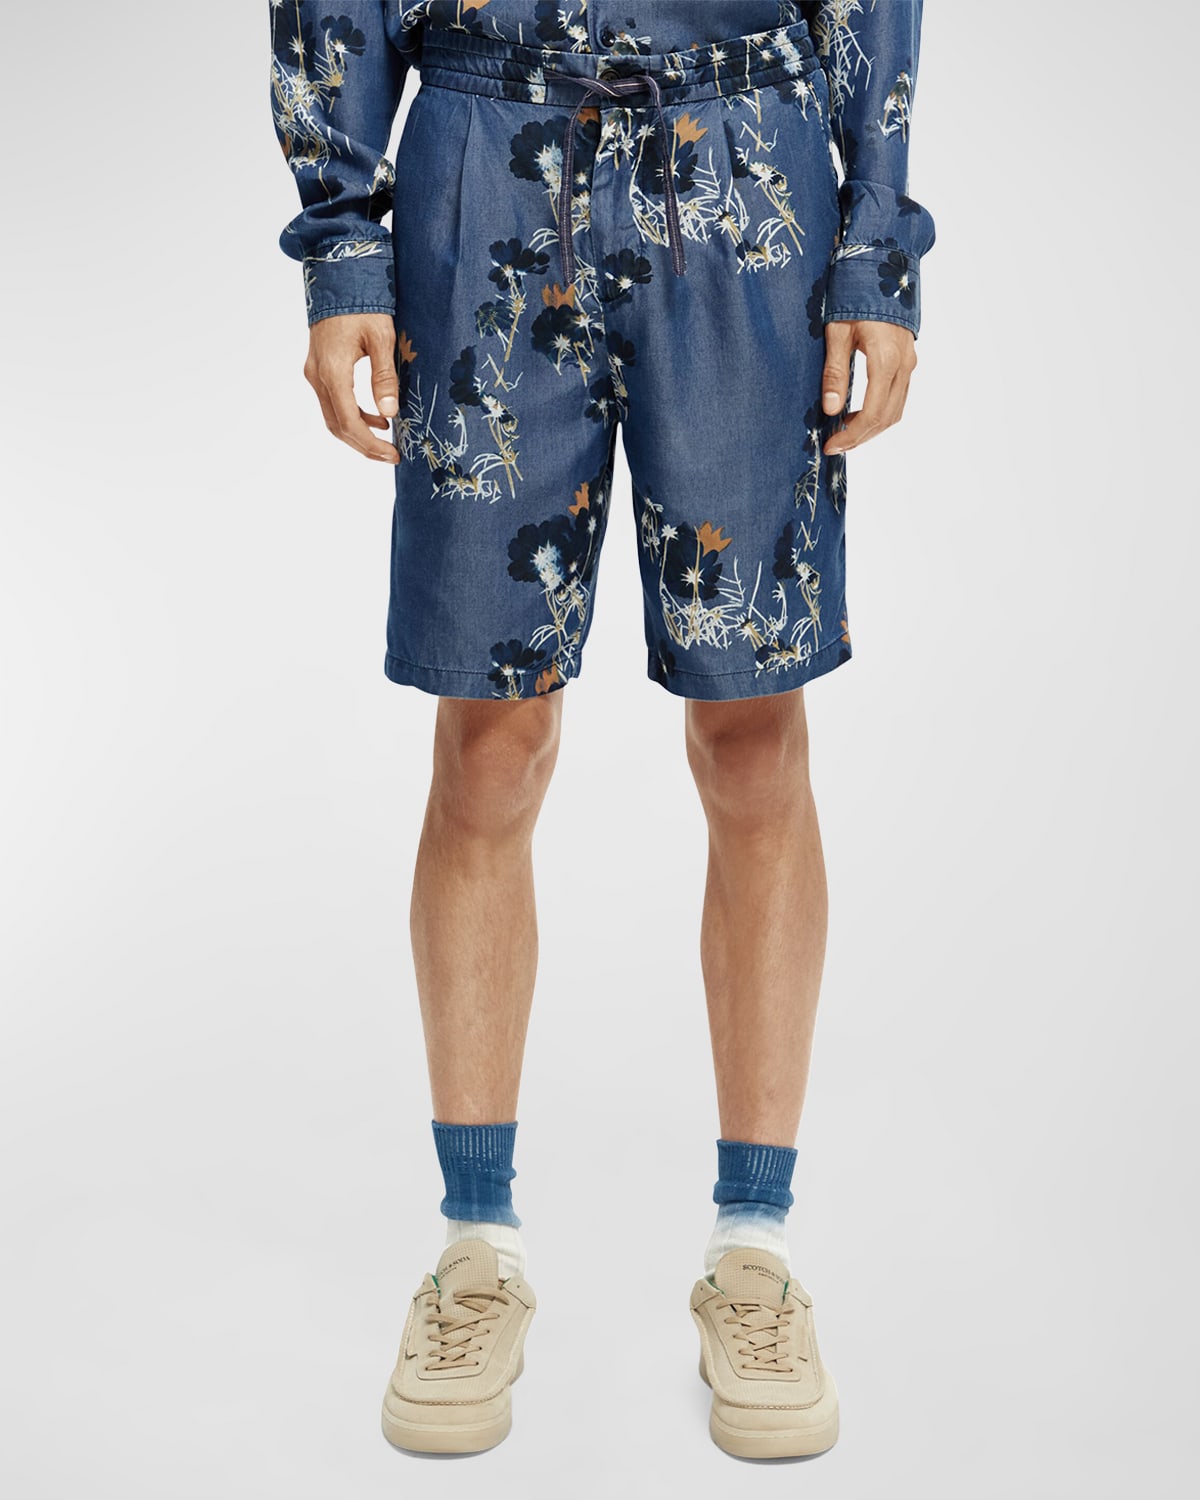 Men's Pleated Floral Drawstring Shorts